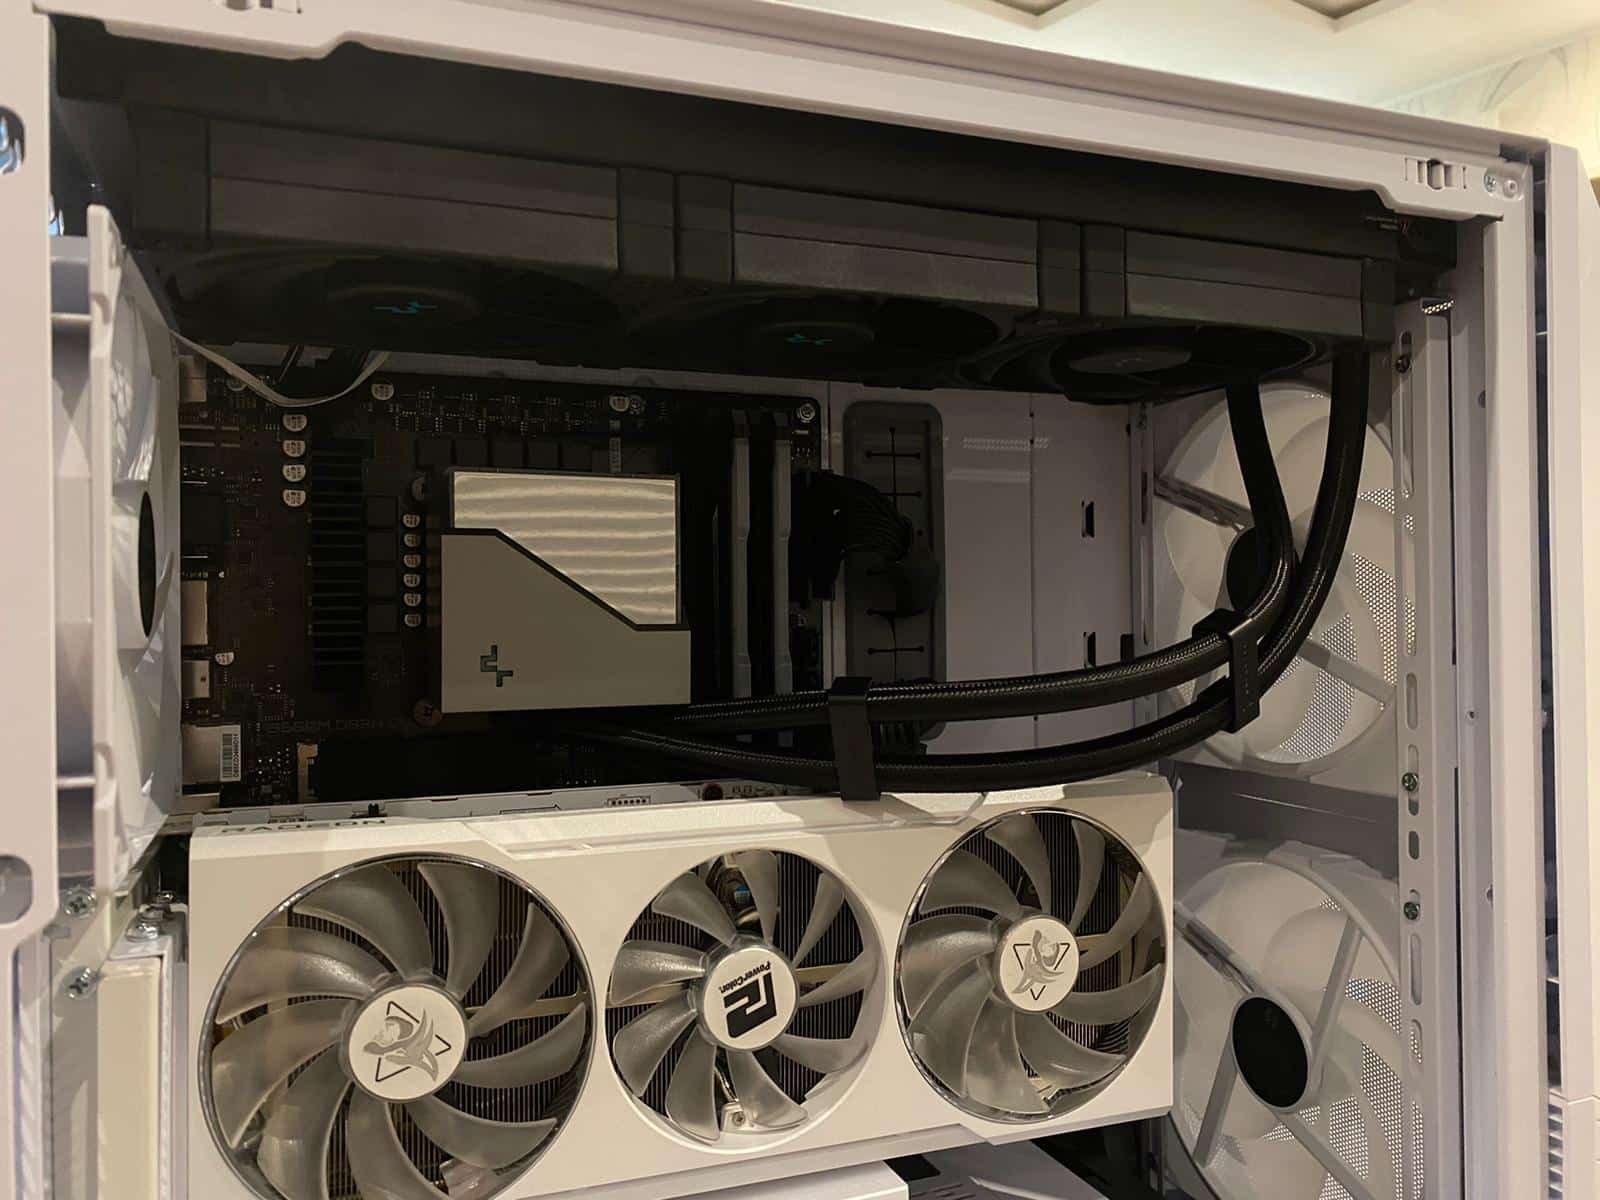 DeepCool LT720 White 360 mm AIO Review - Finished Looks